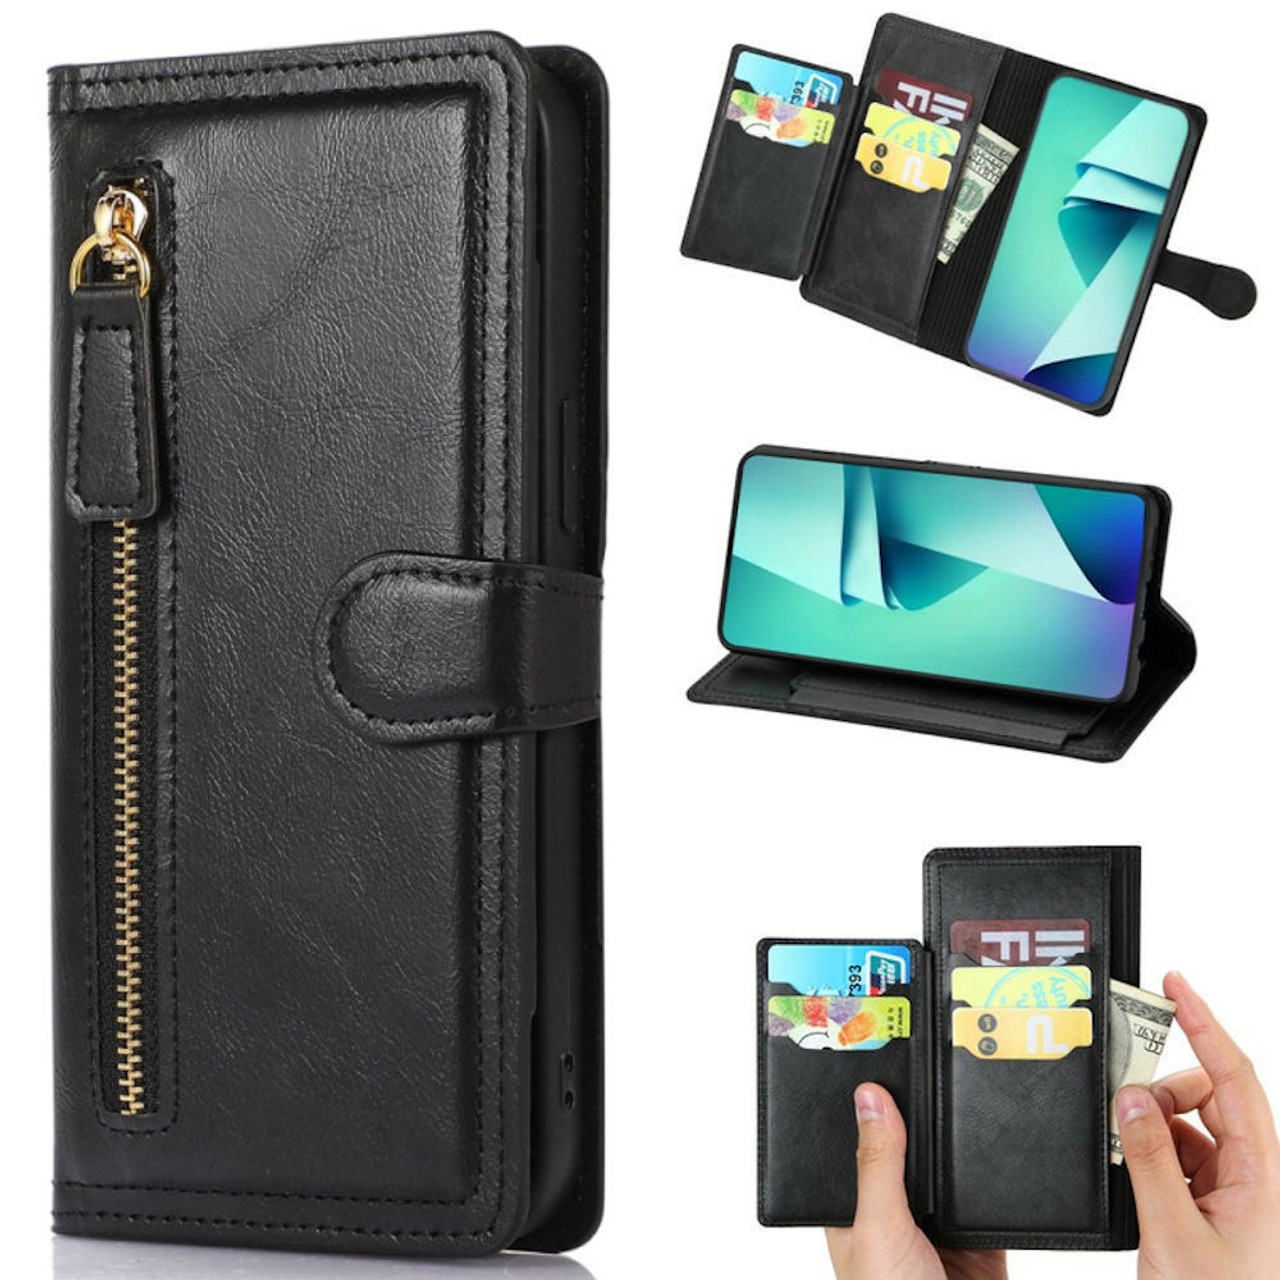 Leather Flip Wallet Phone Case Cover for Galaxy A53 5G,Premium PU Leather  Wallet Case Samsung A53 5G Flip Cell Phone case, Cases for Samsung Galaxy